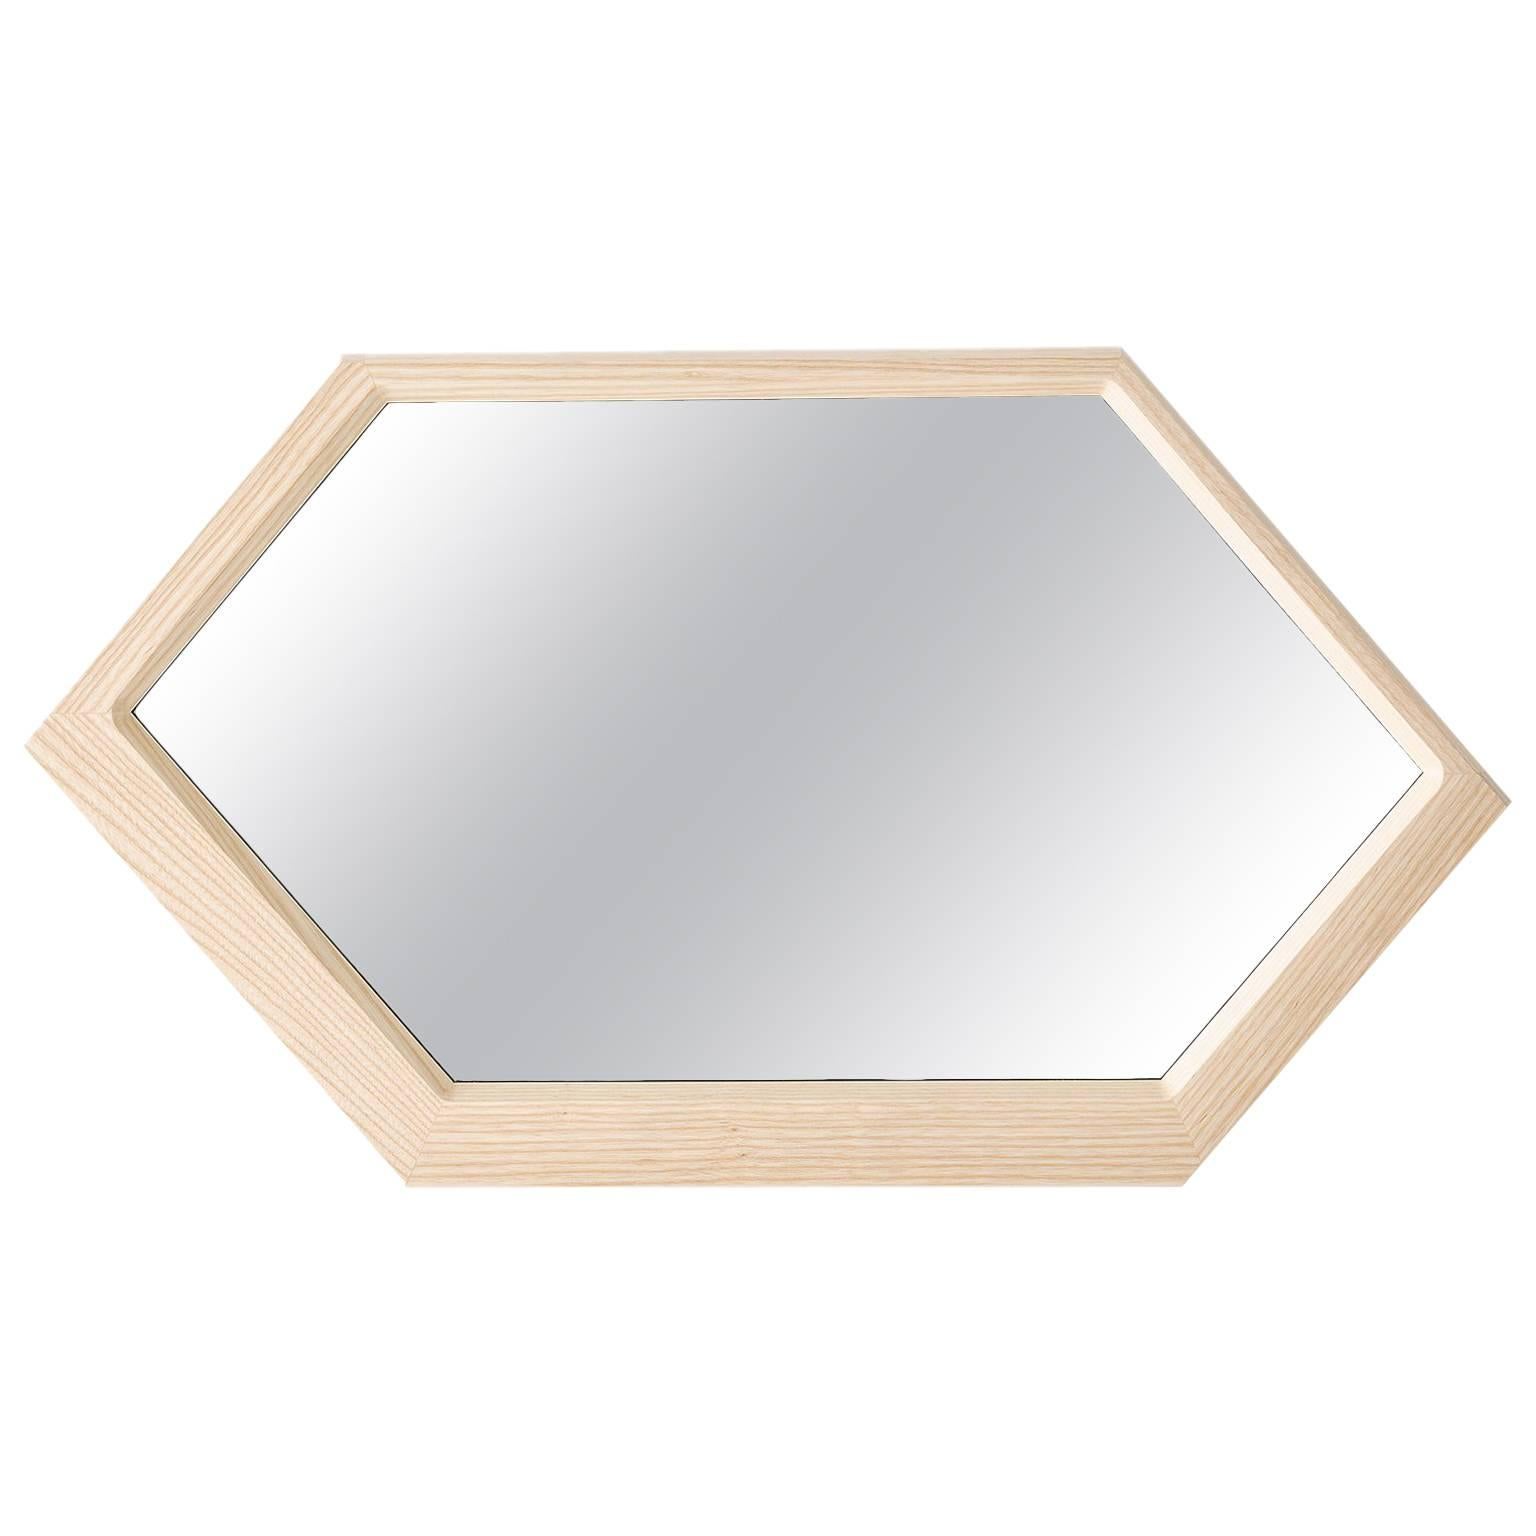 Trance Mirror in Solid Ash - AVAILABLE NOW For Sale